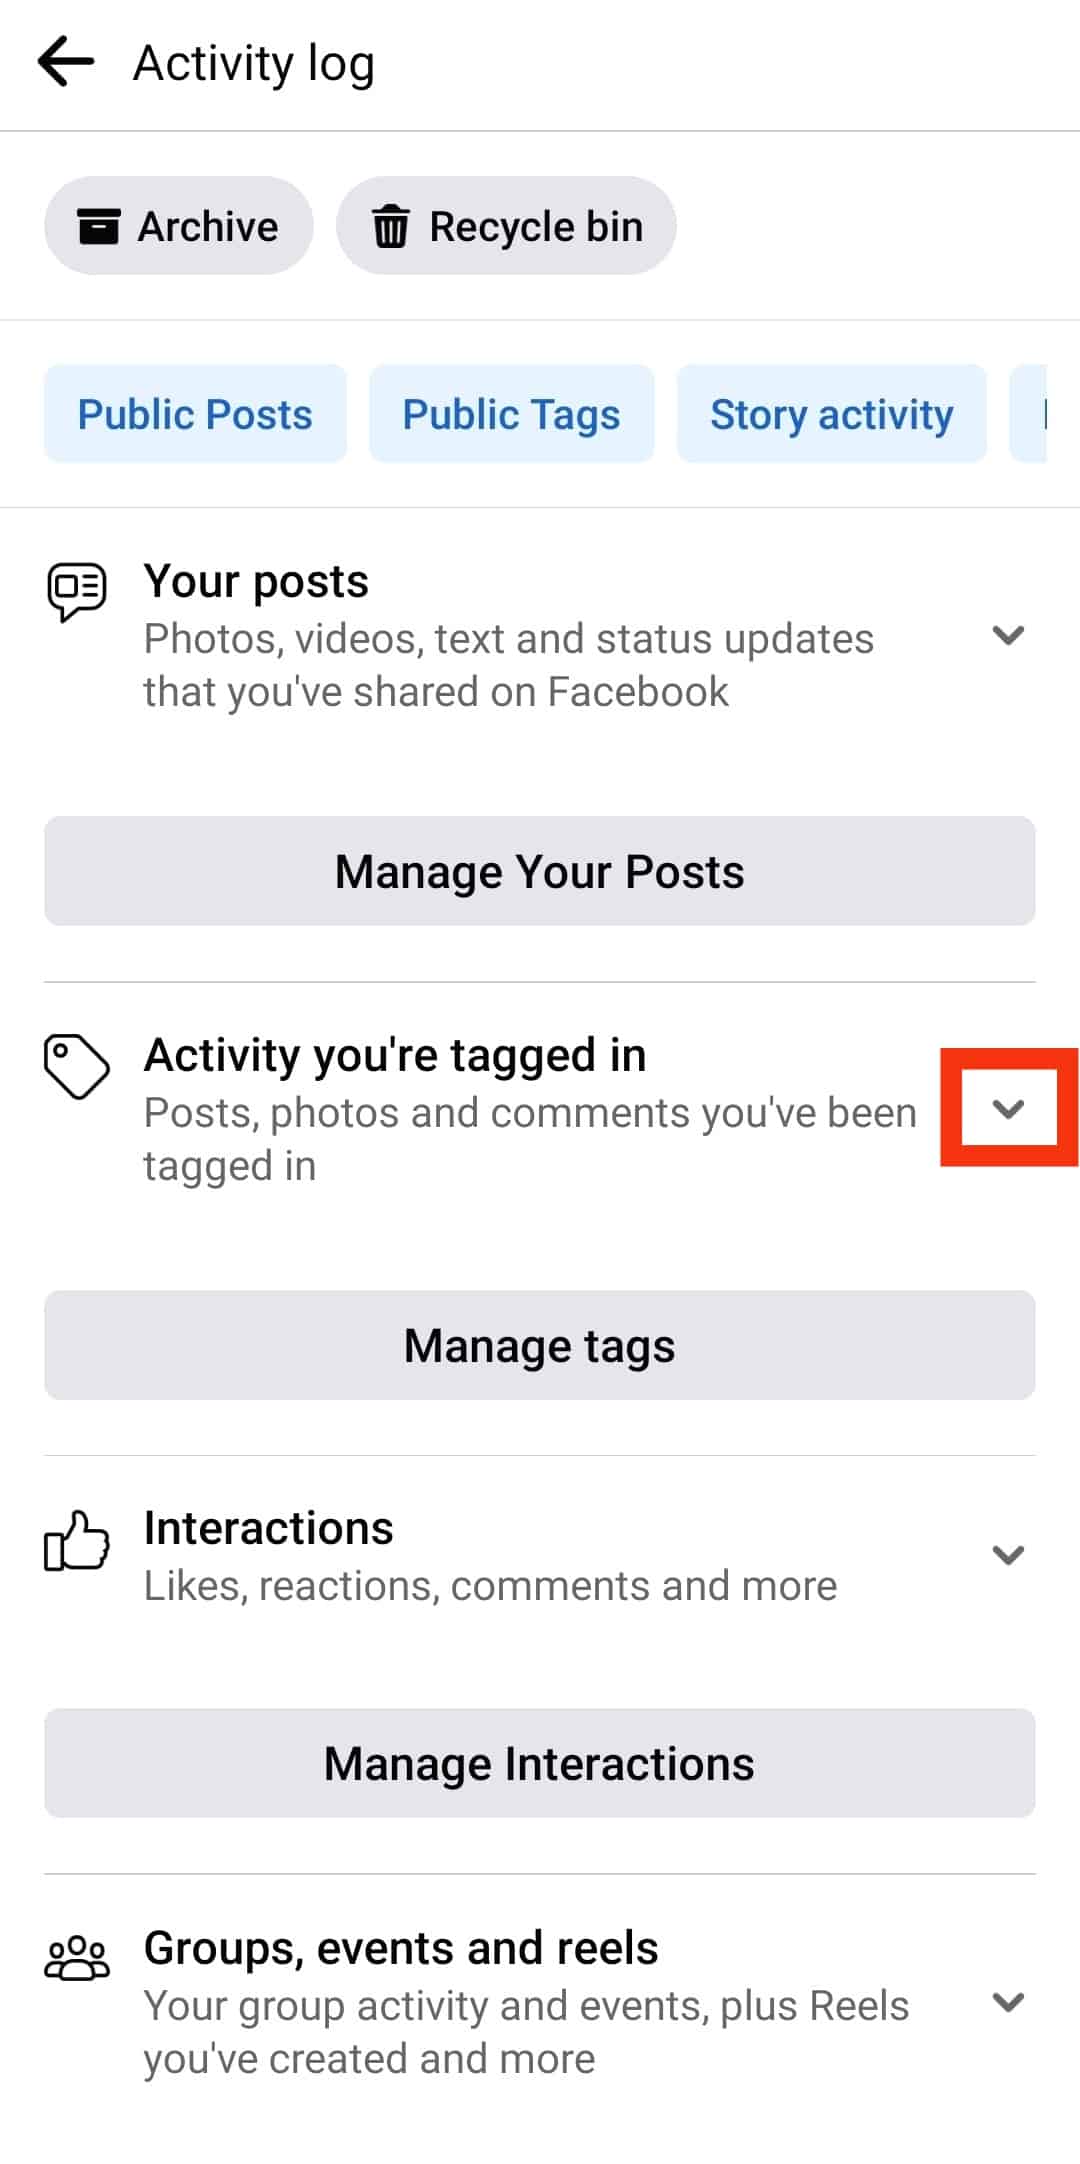 Tap The Arrow Icon Next To The Activity You're Tagged In